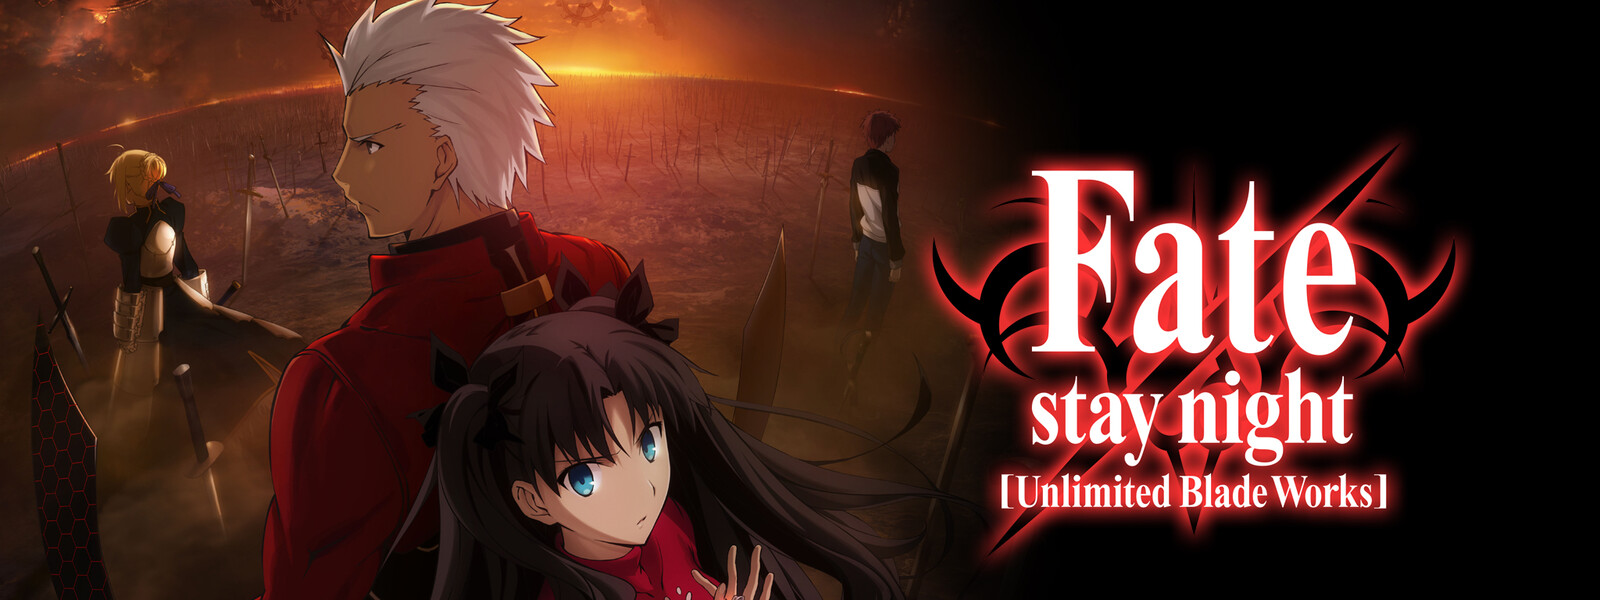 Fate Stay Night Unlimited Blade Works アニメ 無料